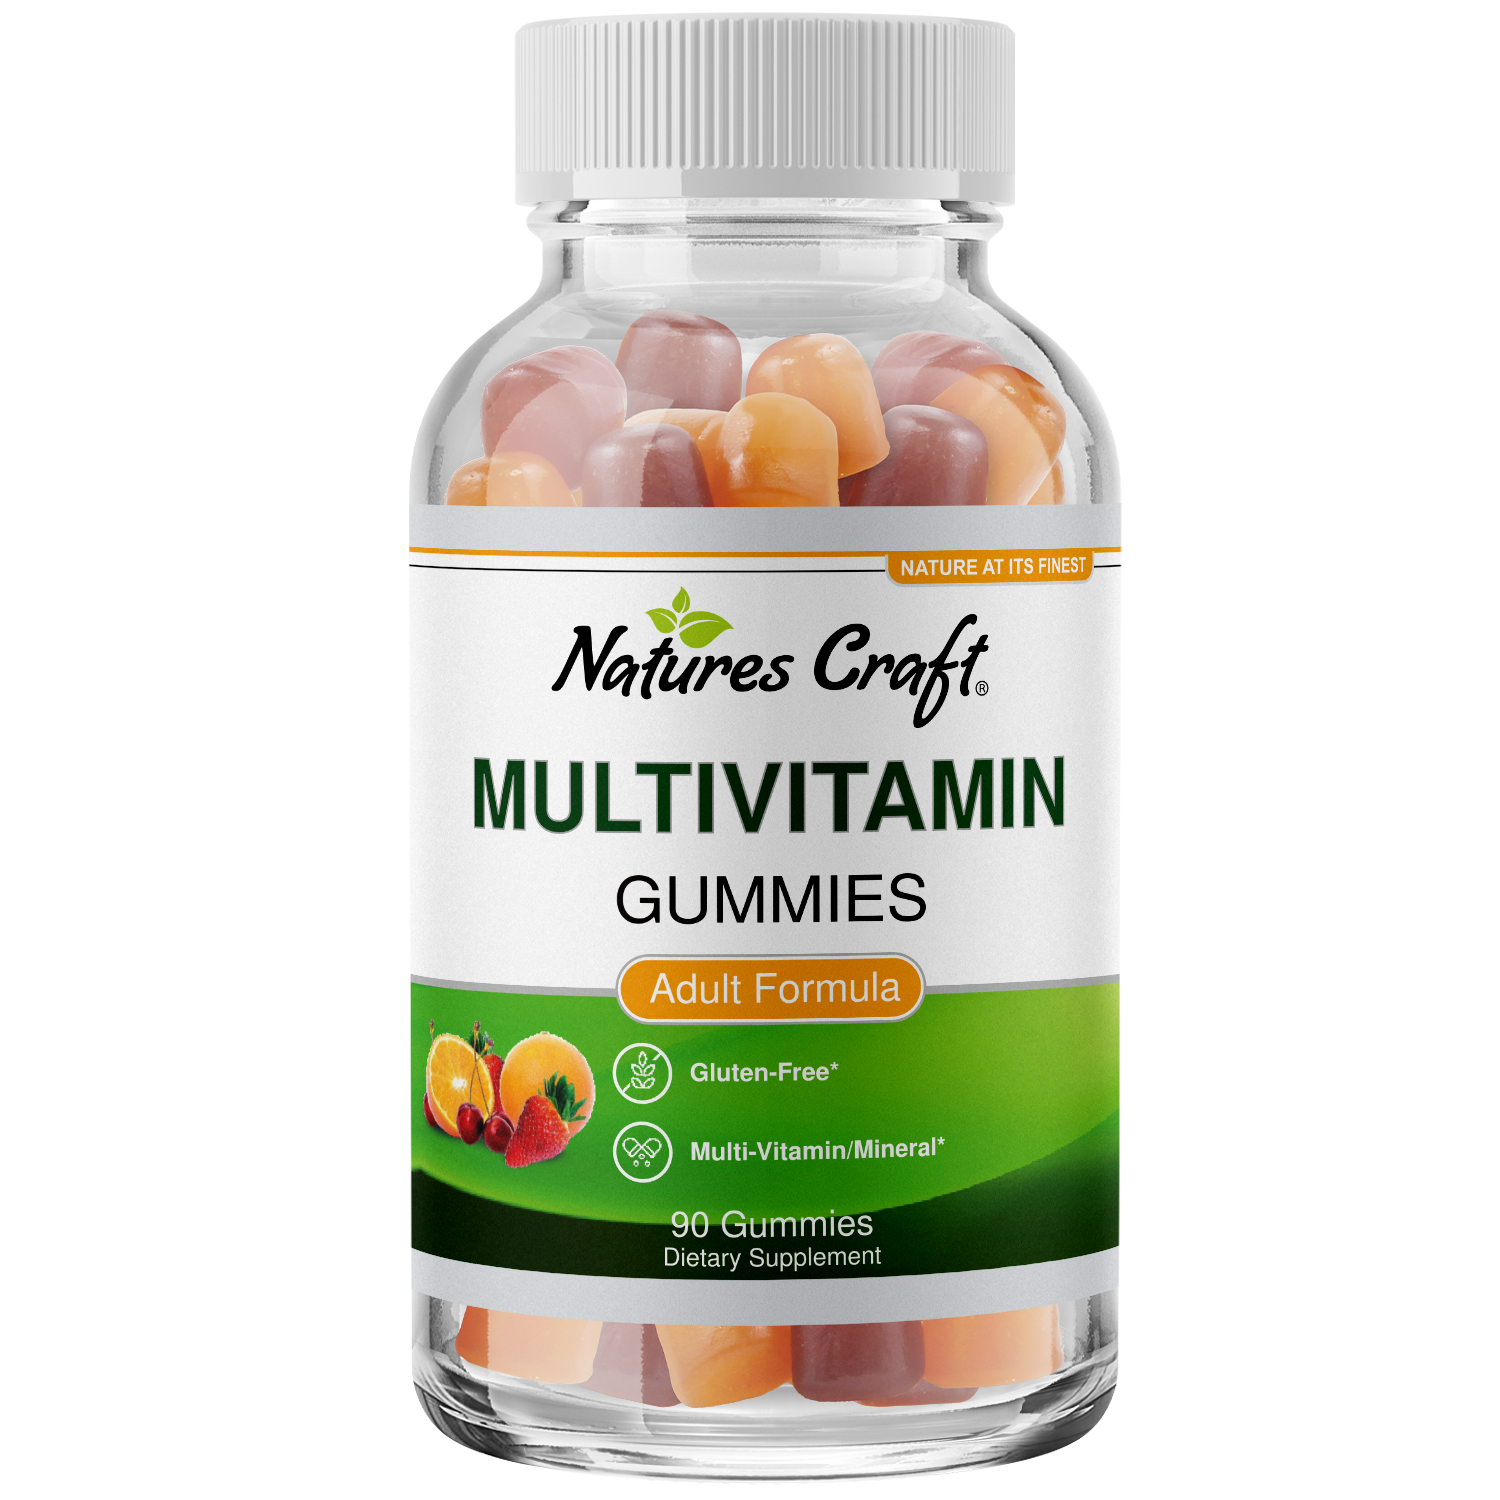 Multivitamin for Adults - 90 Gummies - Nature's Craft